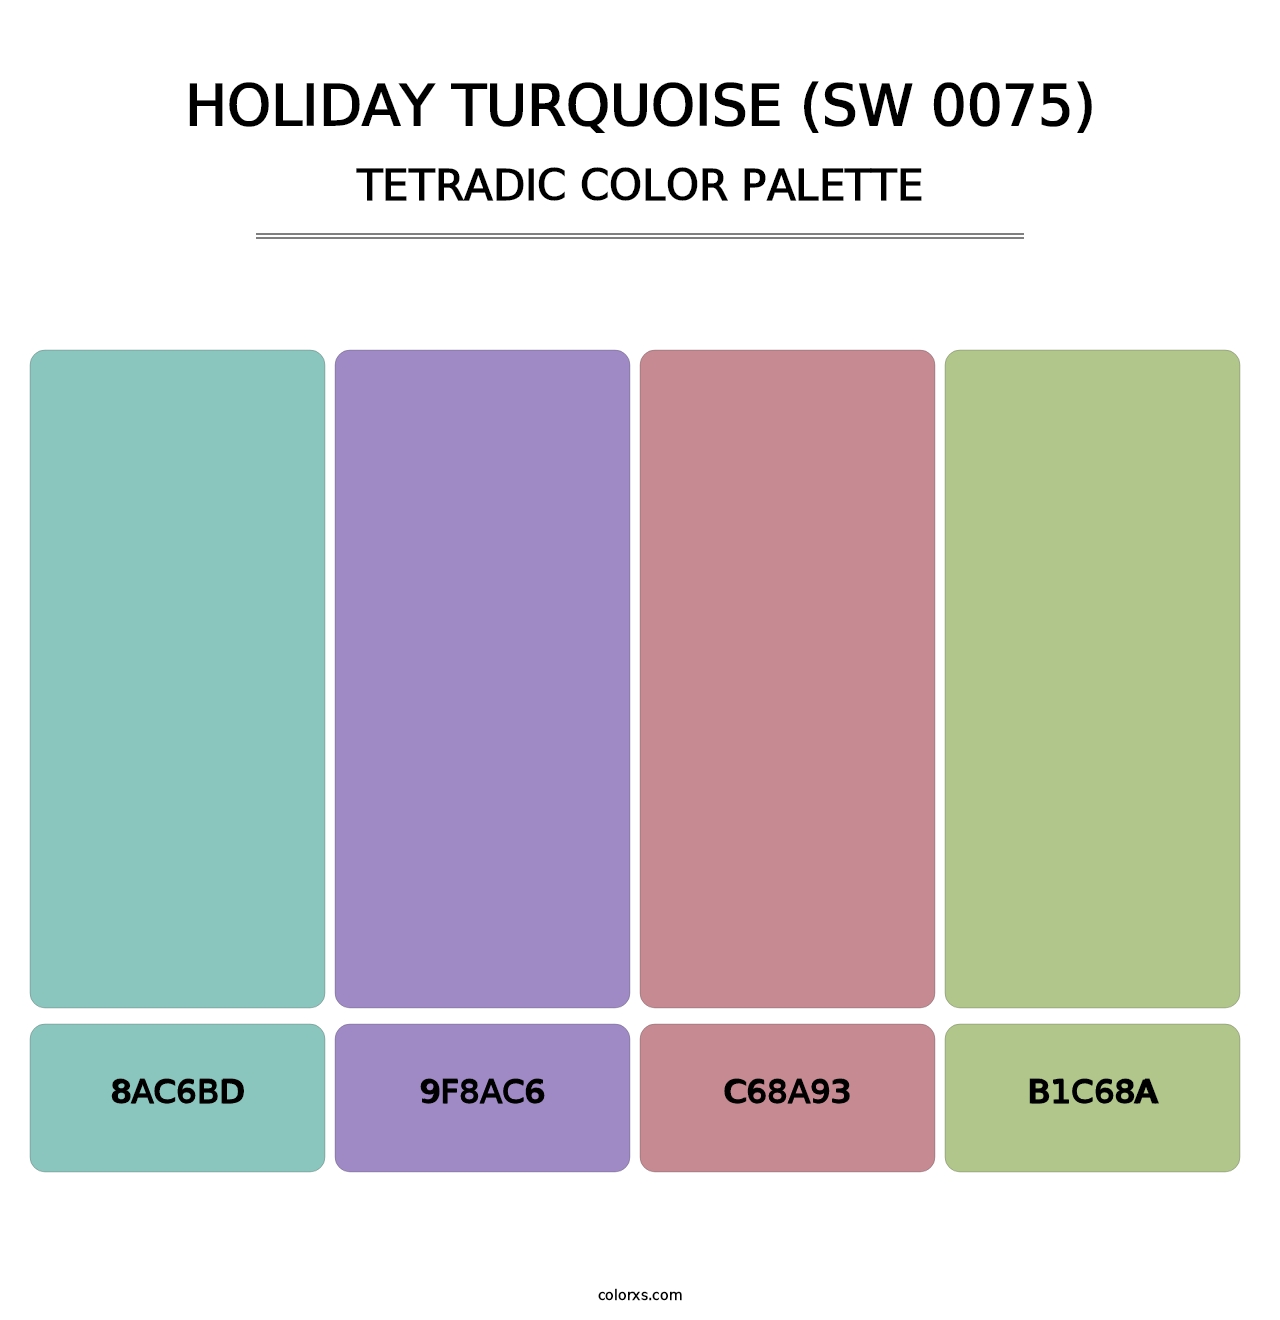 Holiday Turquoise (SW 0075) - Tetradic Color Palette